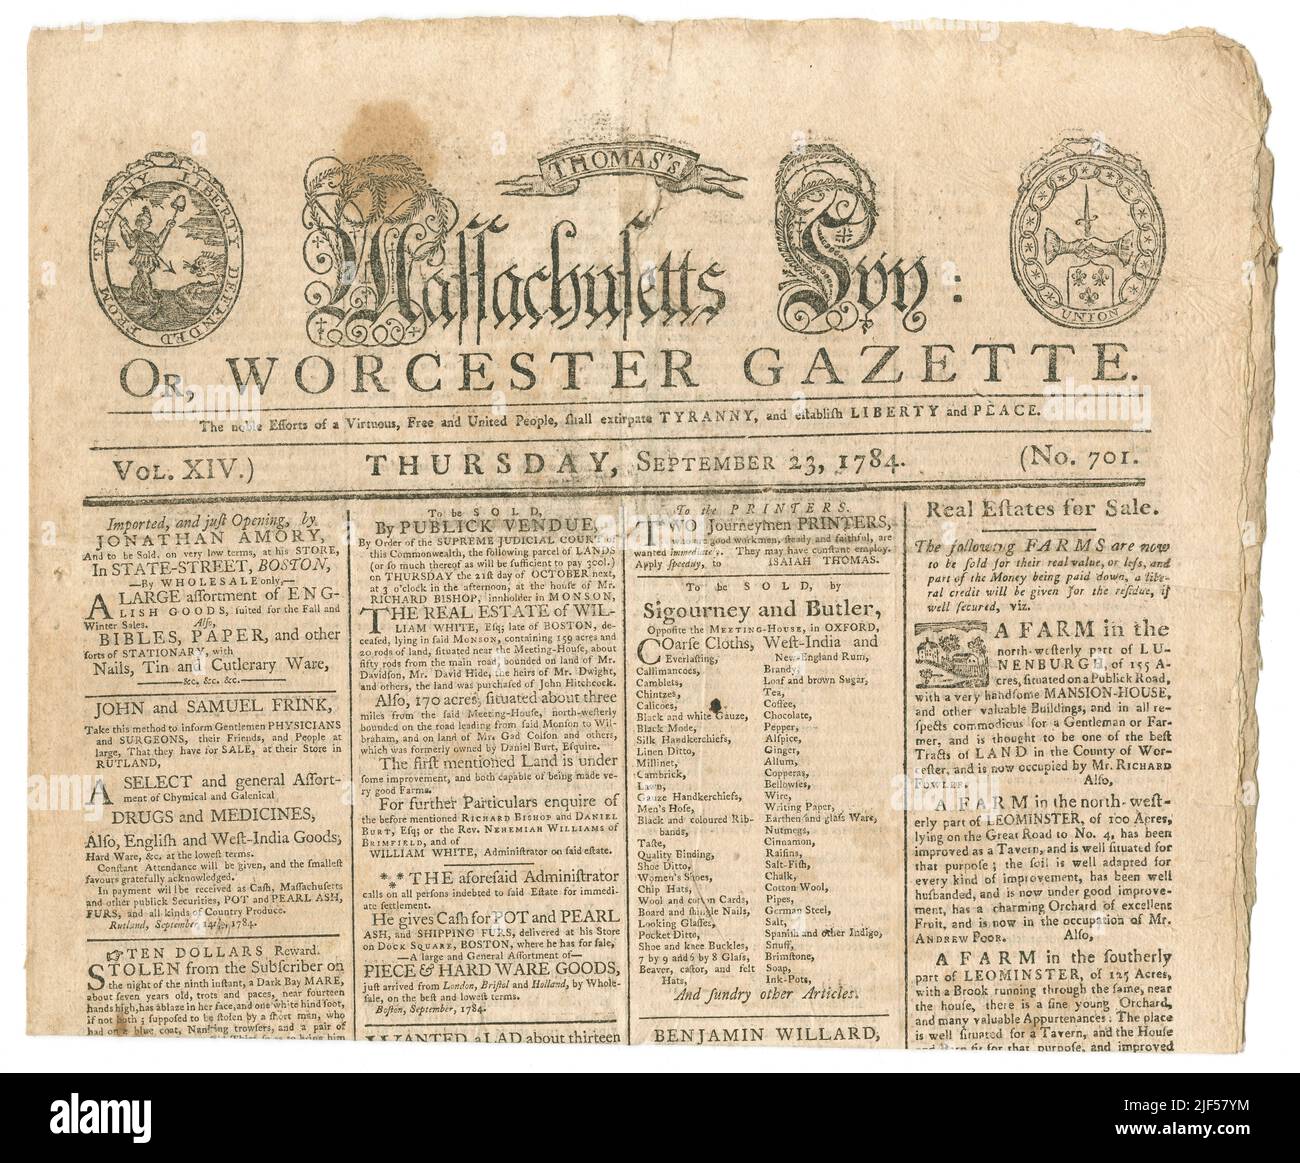 The September 23, 1784 issue of the Massachusetts Spy or Worcester Gazette newspaper, published by Isaiah Thomas. Isaiah Thomas (1749-1831) was an early American printer, newspaper publisher and author. He performed the first public reading of the Declaration of Independence in Worcester, Massachusetts, and reported the first account of the Battles of Lexington and Concord. He was the founder of the American Antiquarian Society. SOURCE: ORIGINAL NEWSPAPER Stock Photo